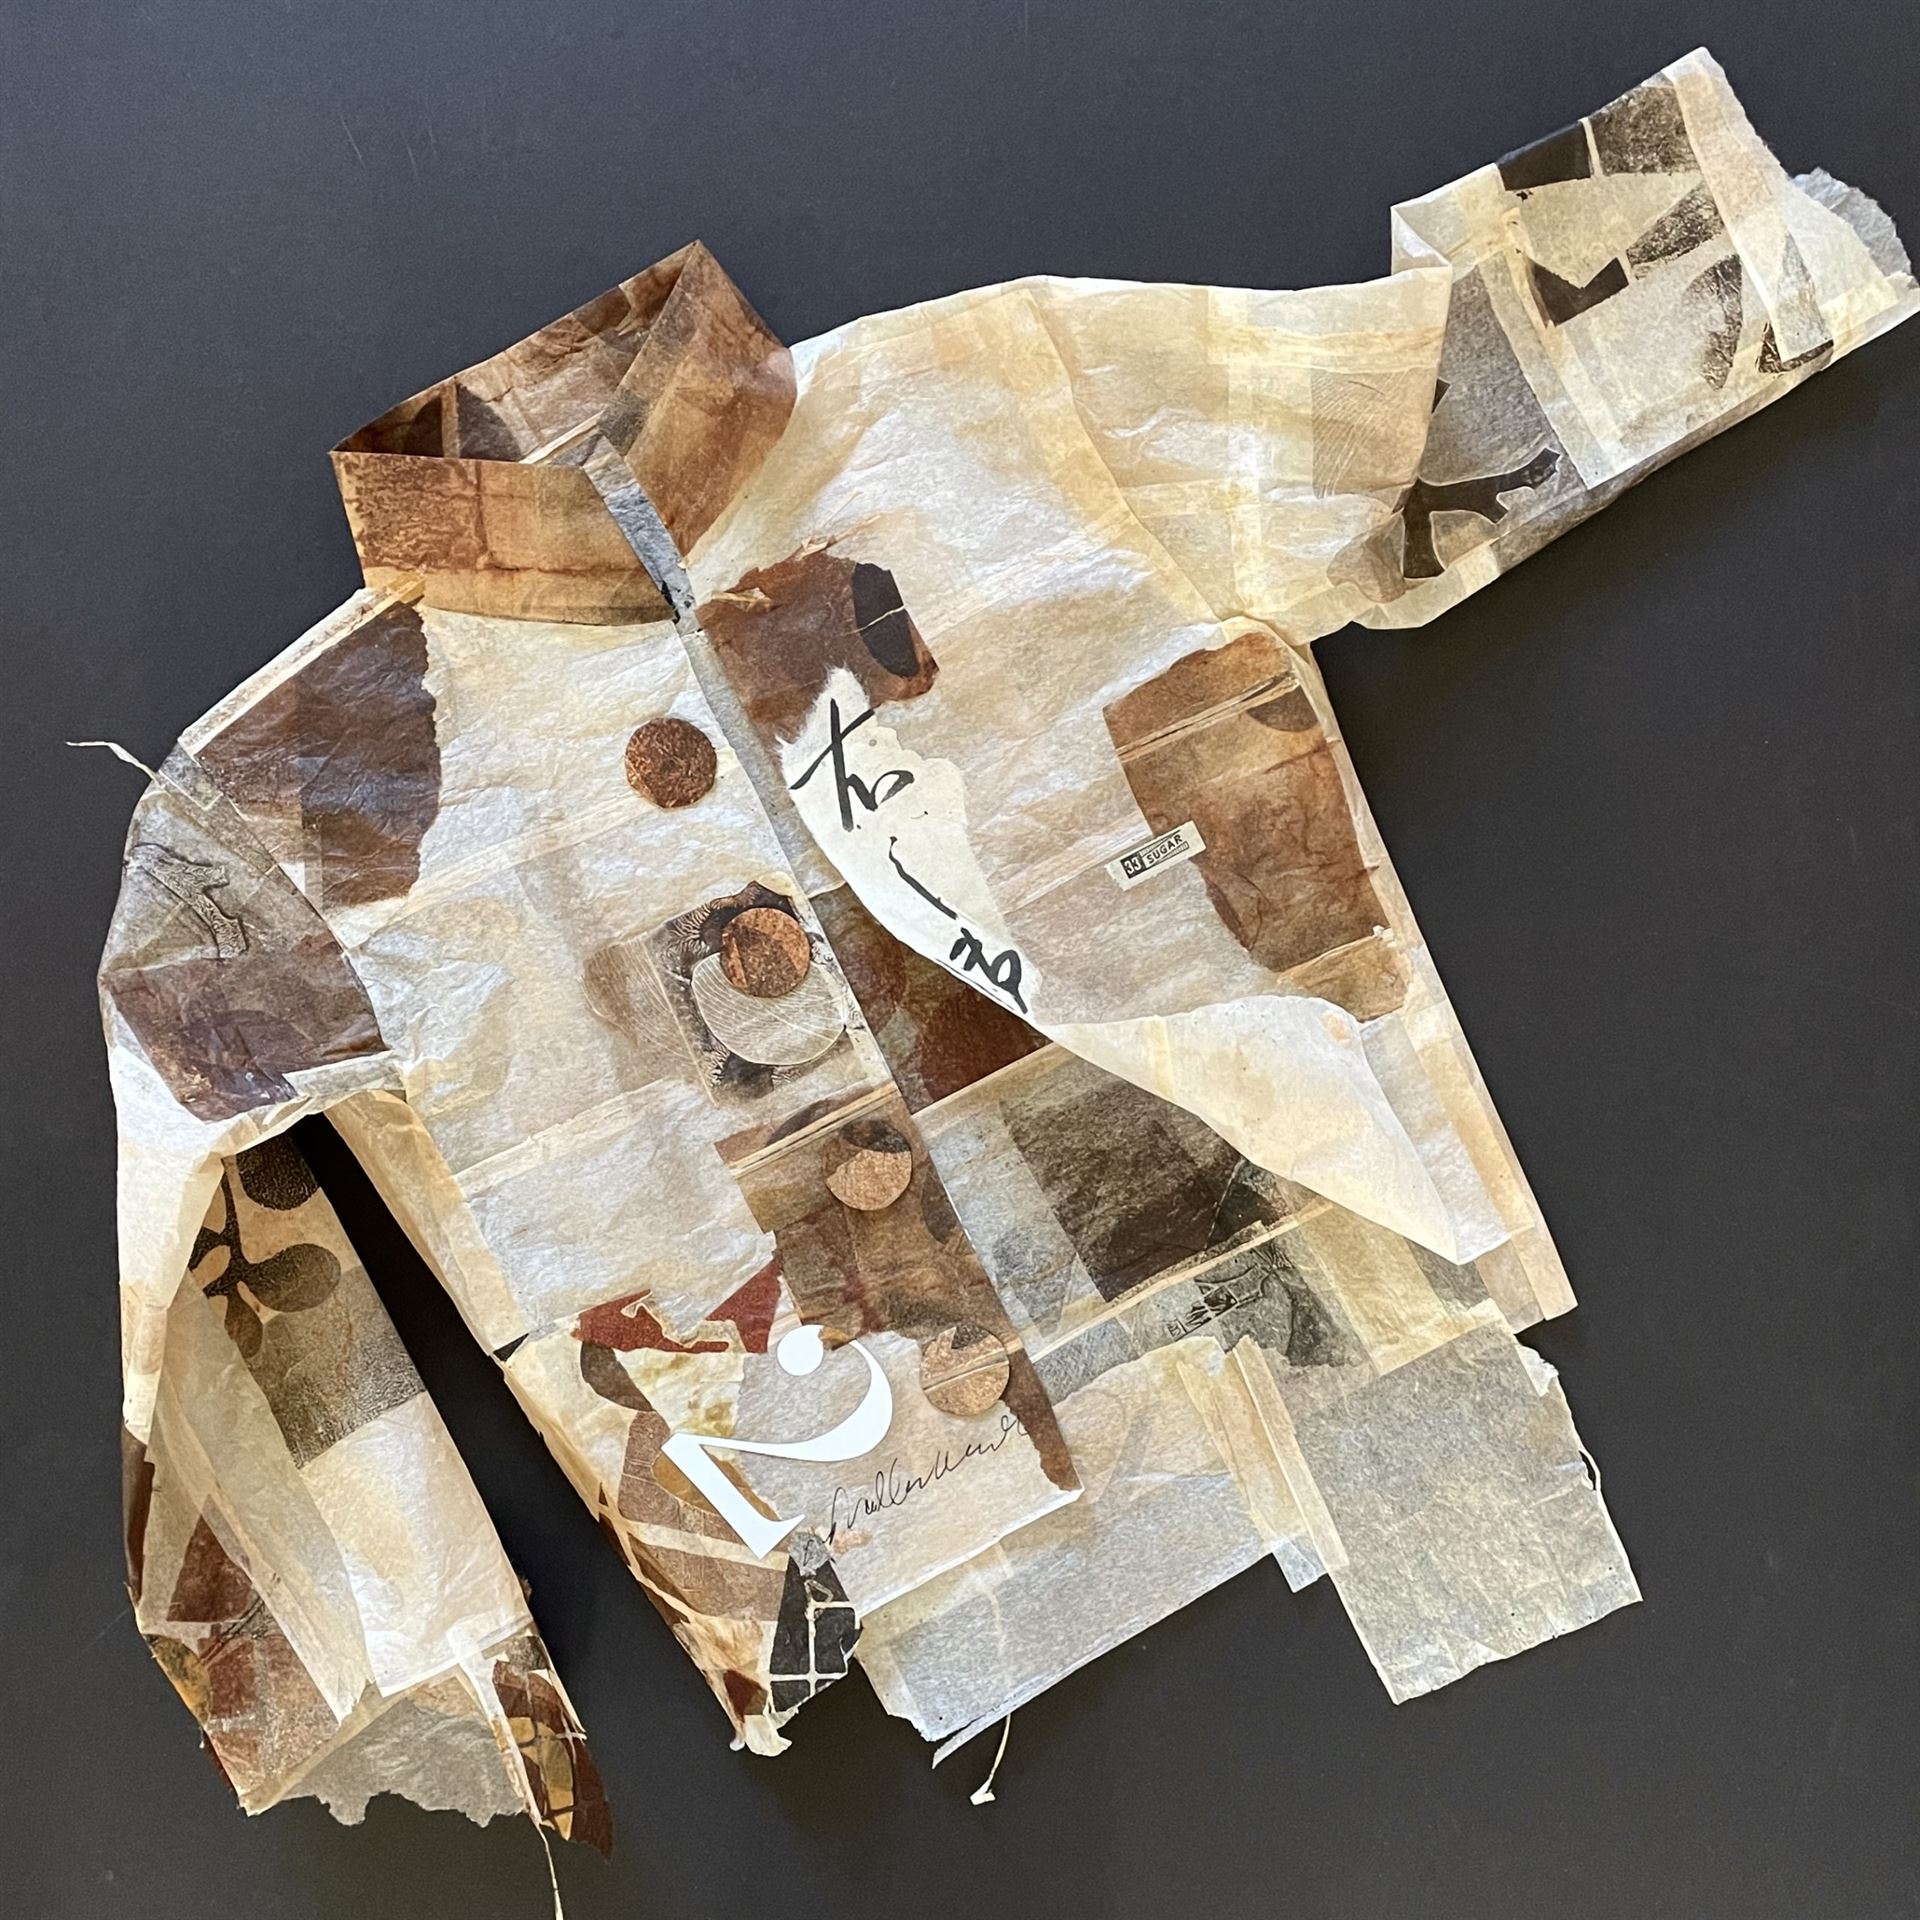 A shirt made out of tea bags.